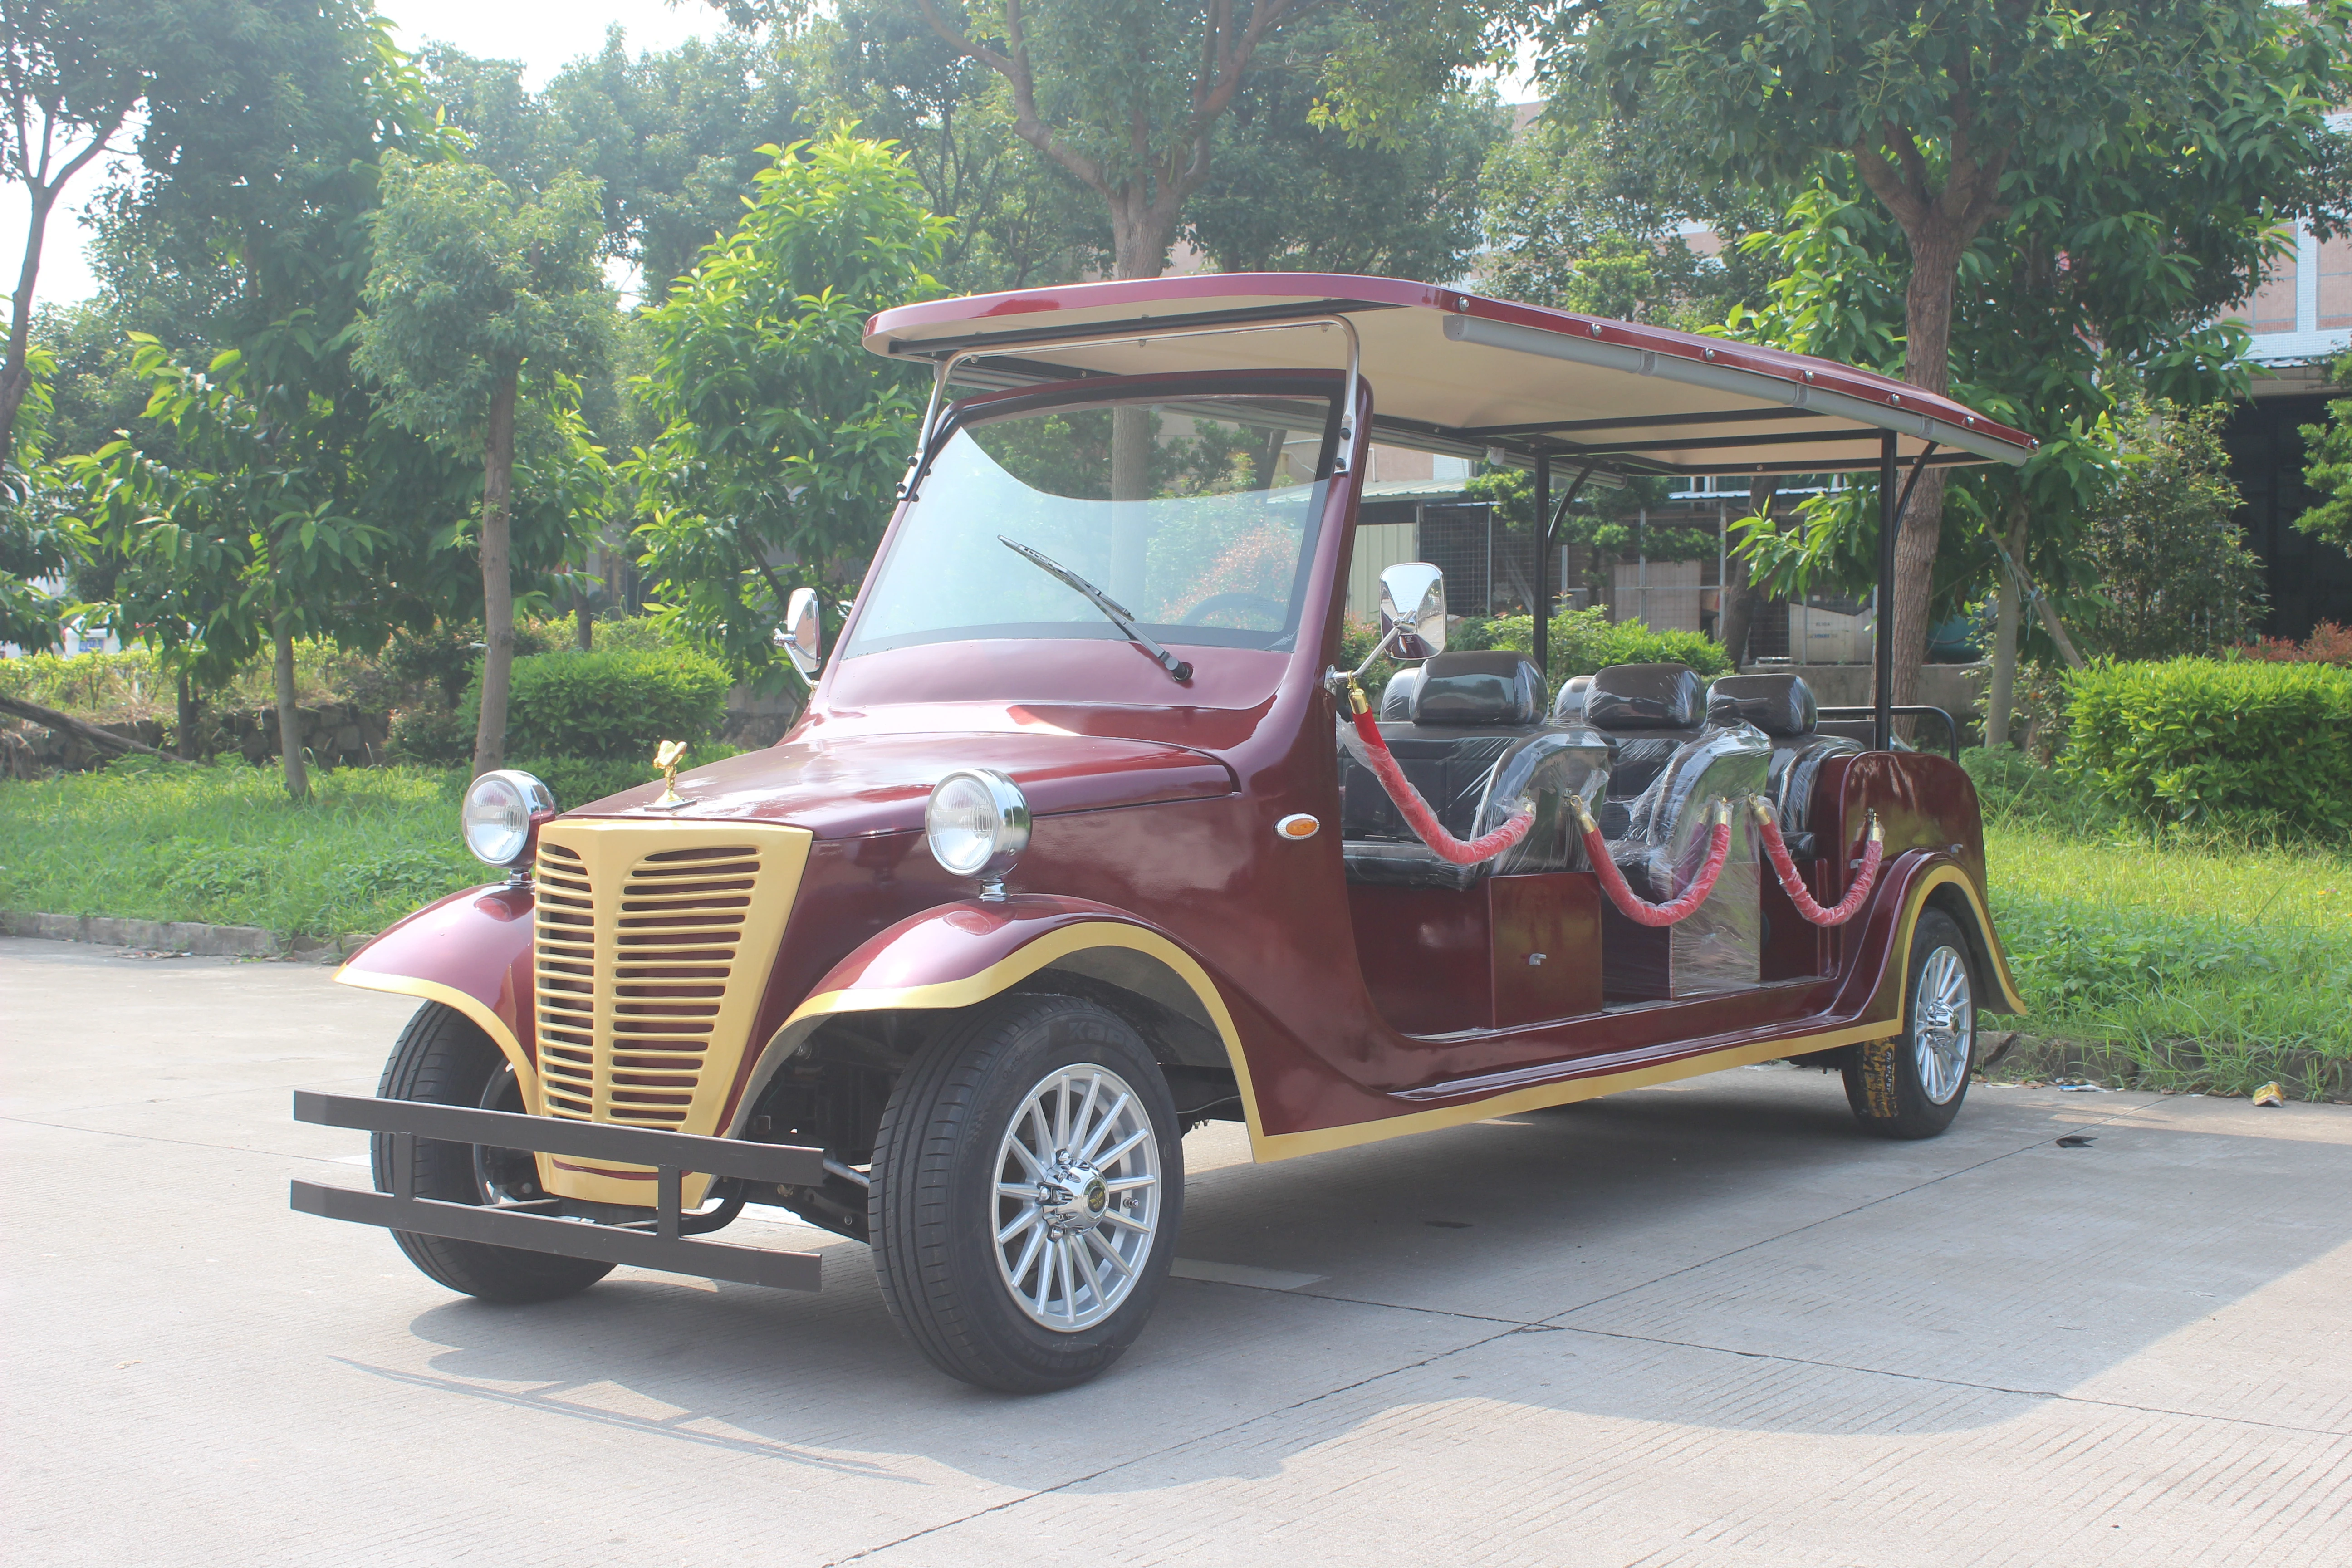 Hotel golf cart 8 seater Classic Electric Vintage Cars new car